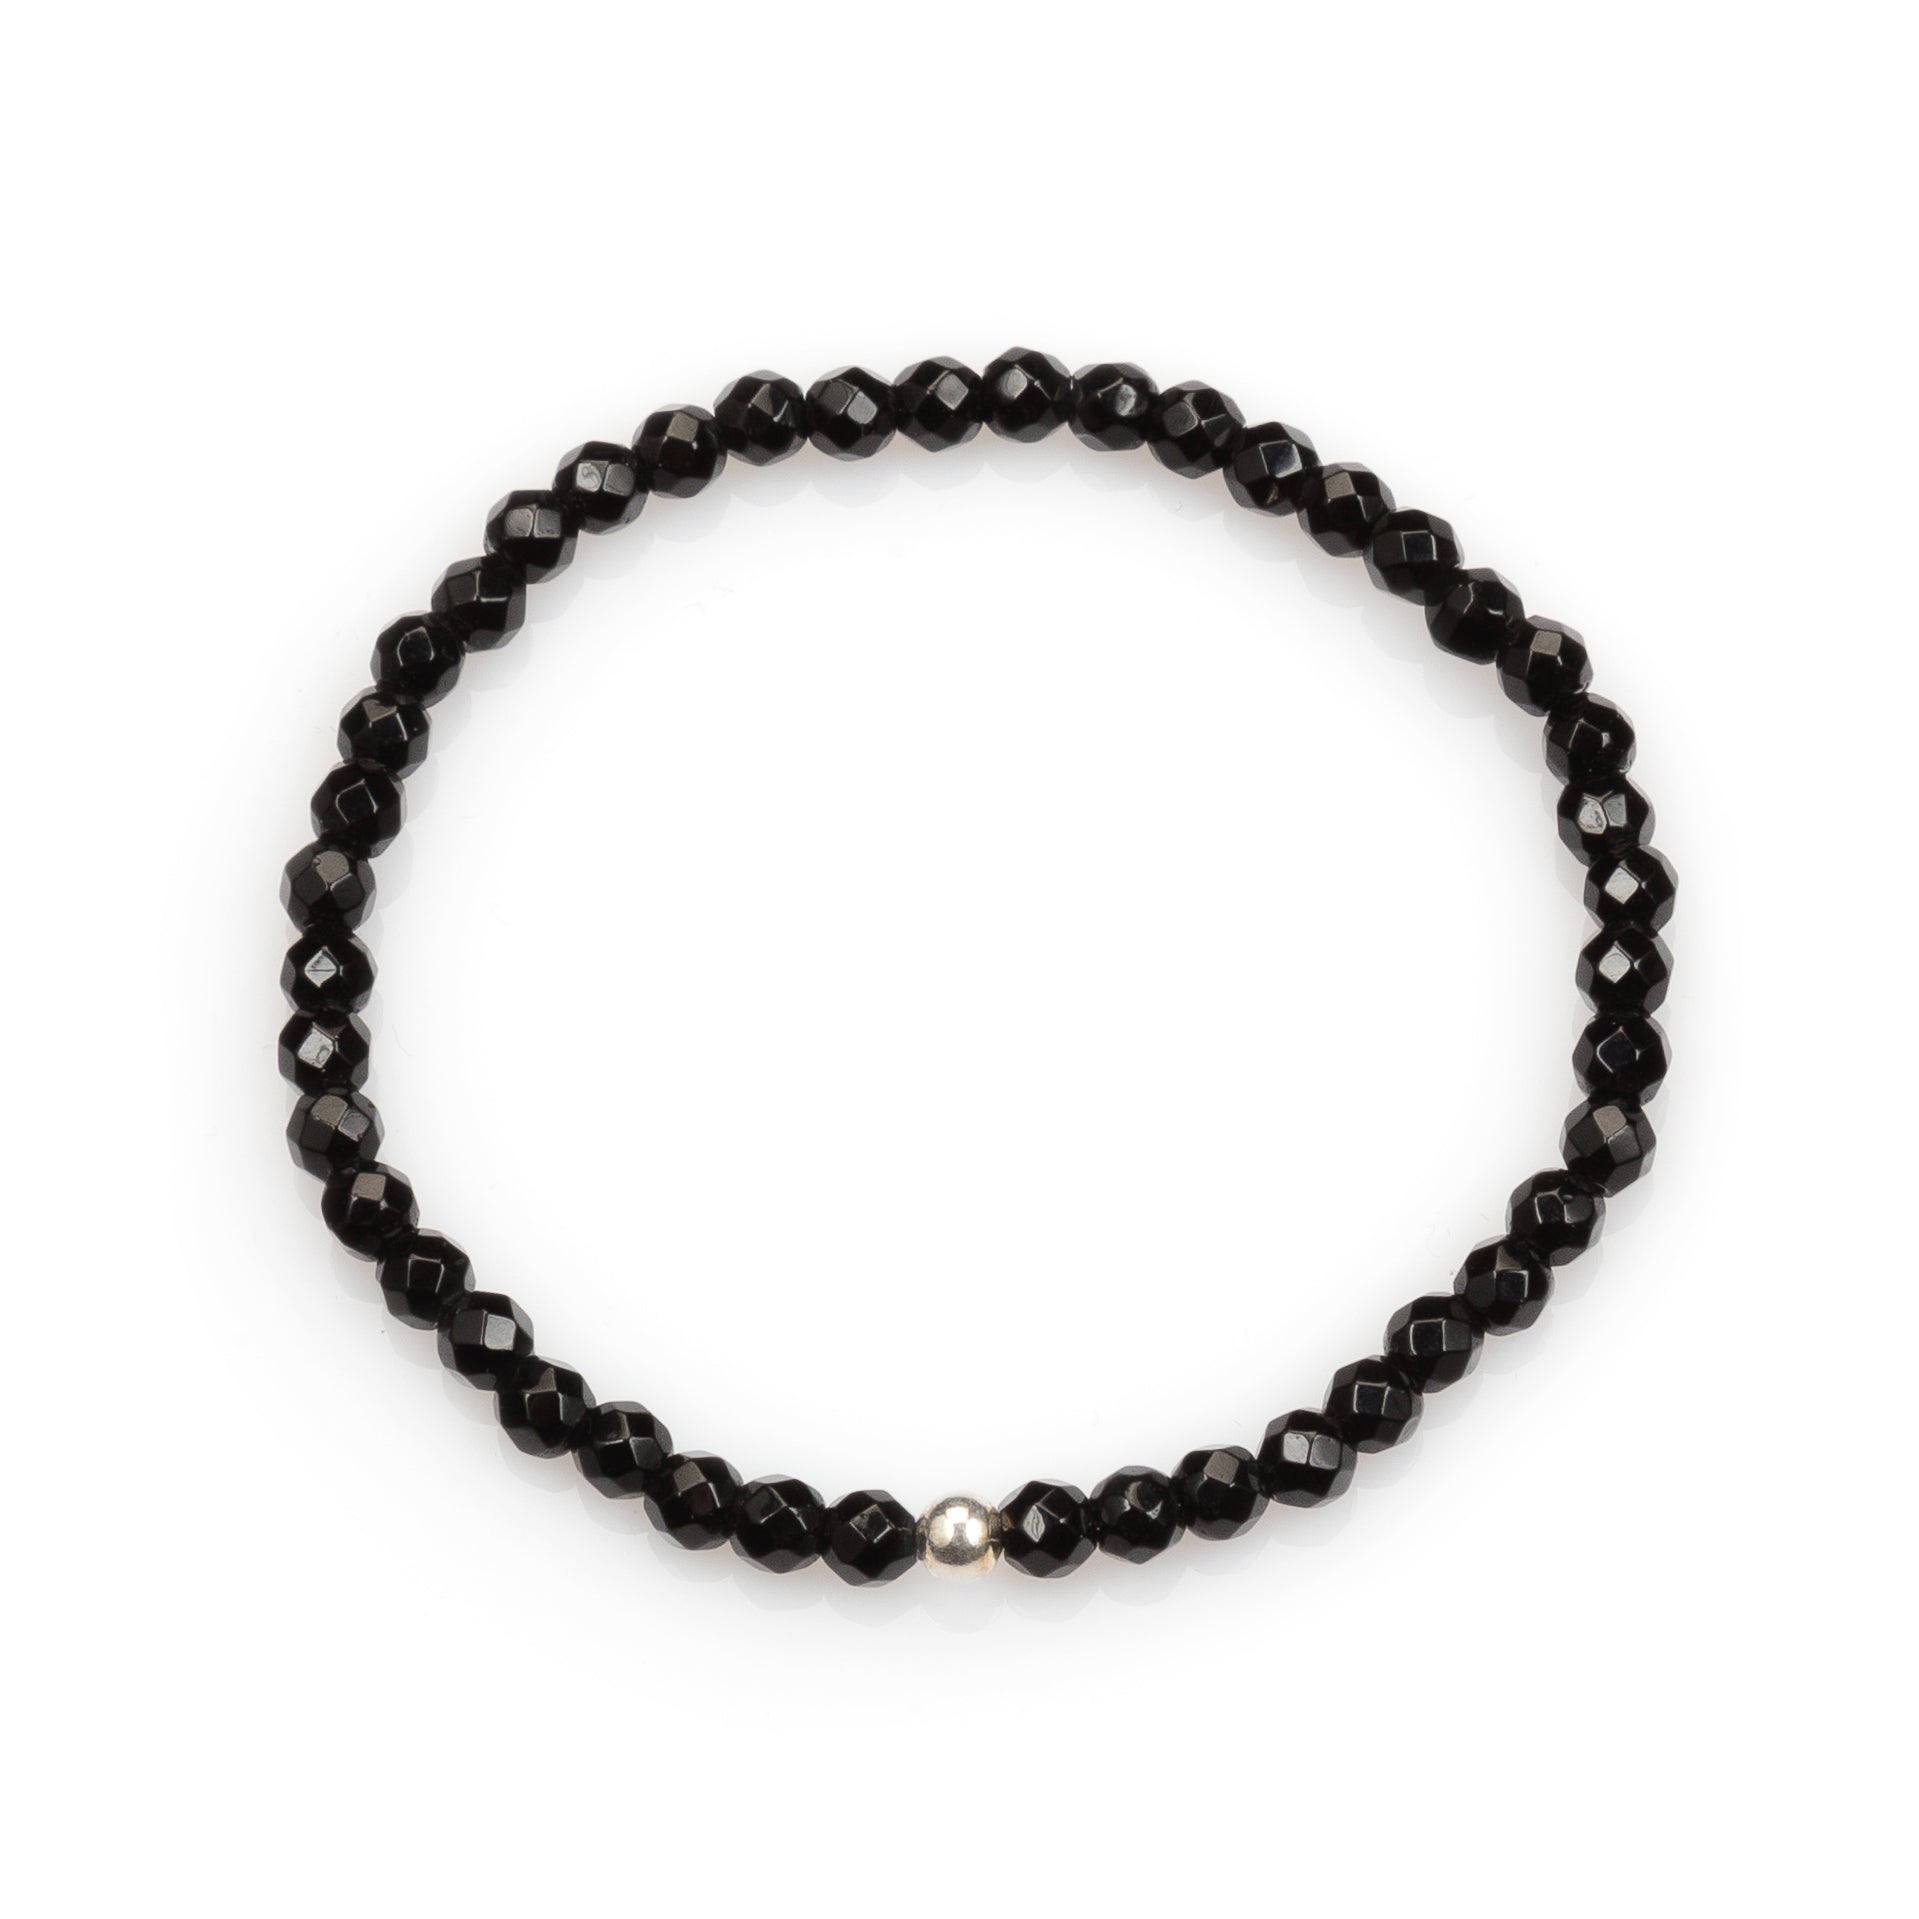 Faceted Black Onyx Bracelet with Silver Ball Bead